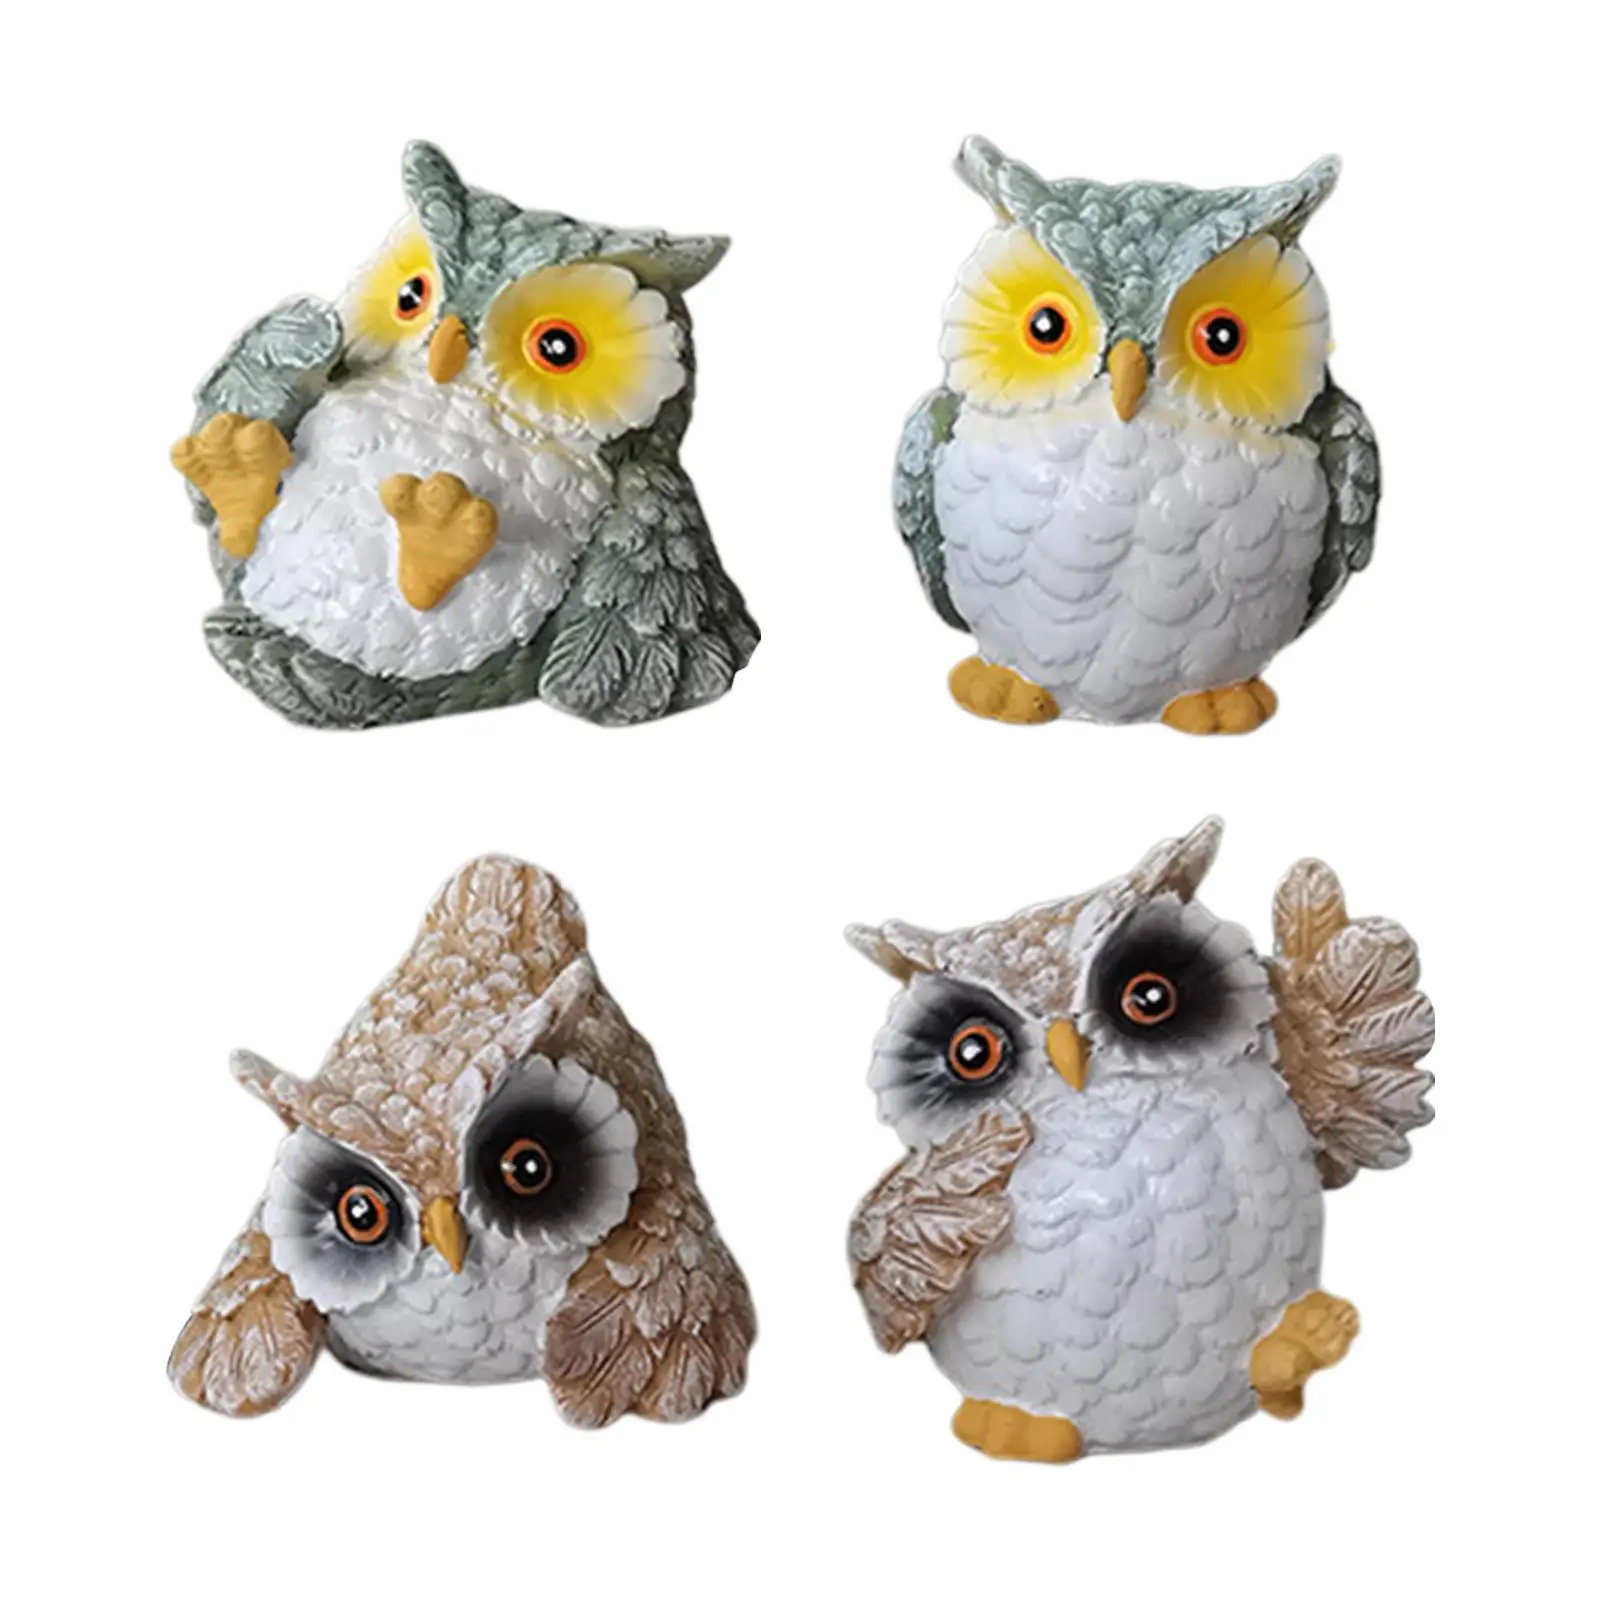 

4x Garden Owl Figurine Realistic Decorative Sculpture Lawn Ornaments for tabletop Patio Home Holiday Gifts